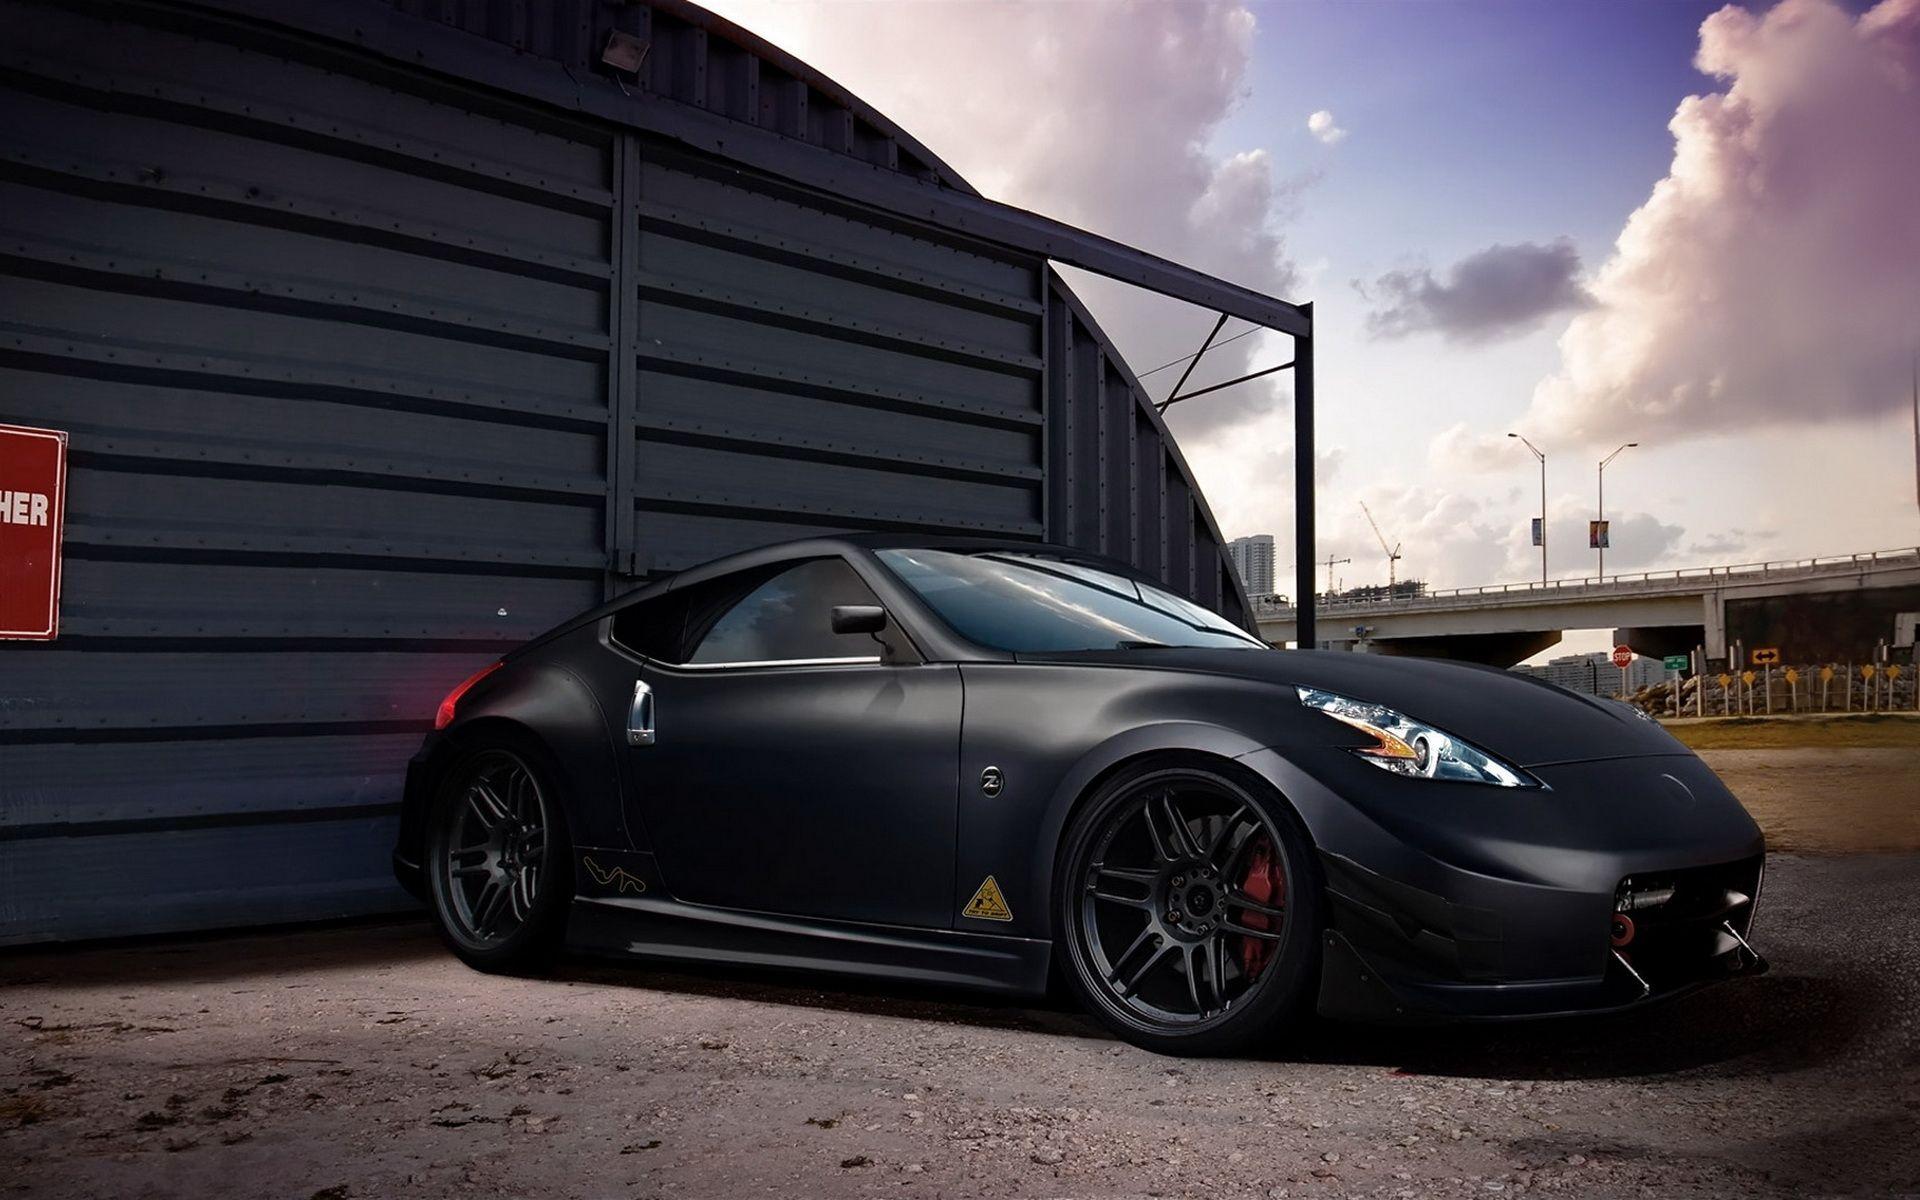 Nissan 370z wallpaper and image, picture, photo